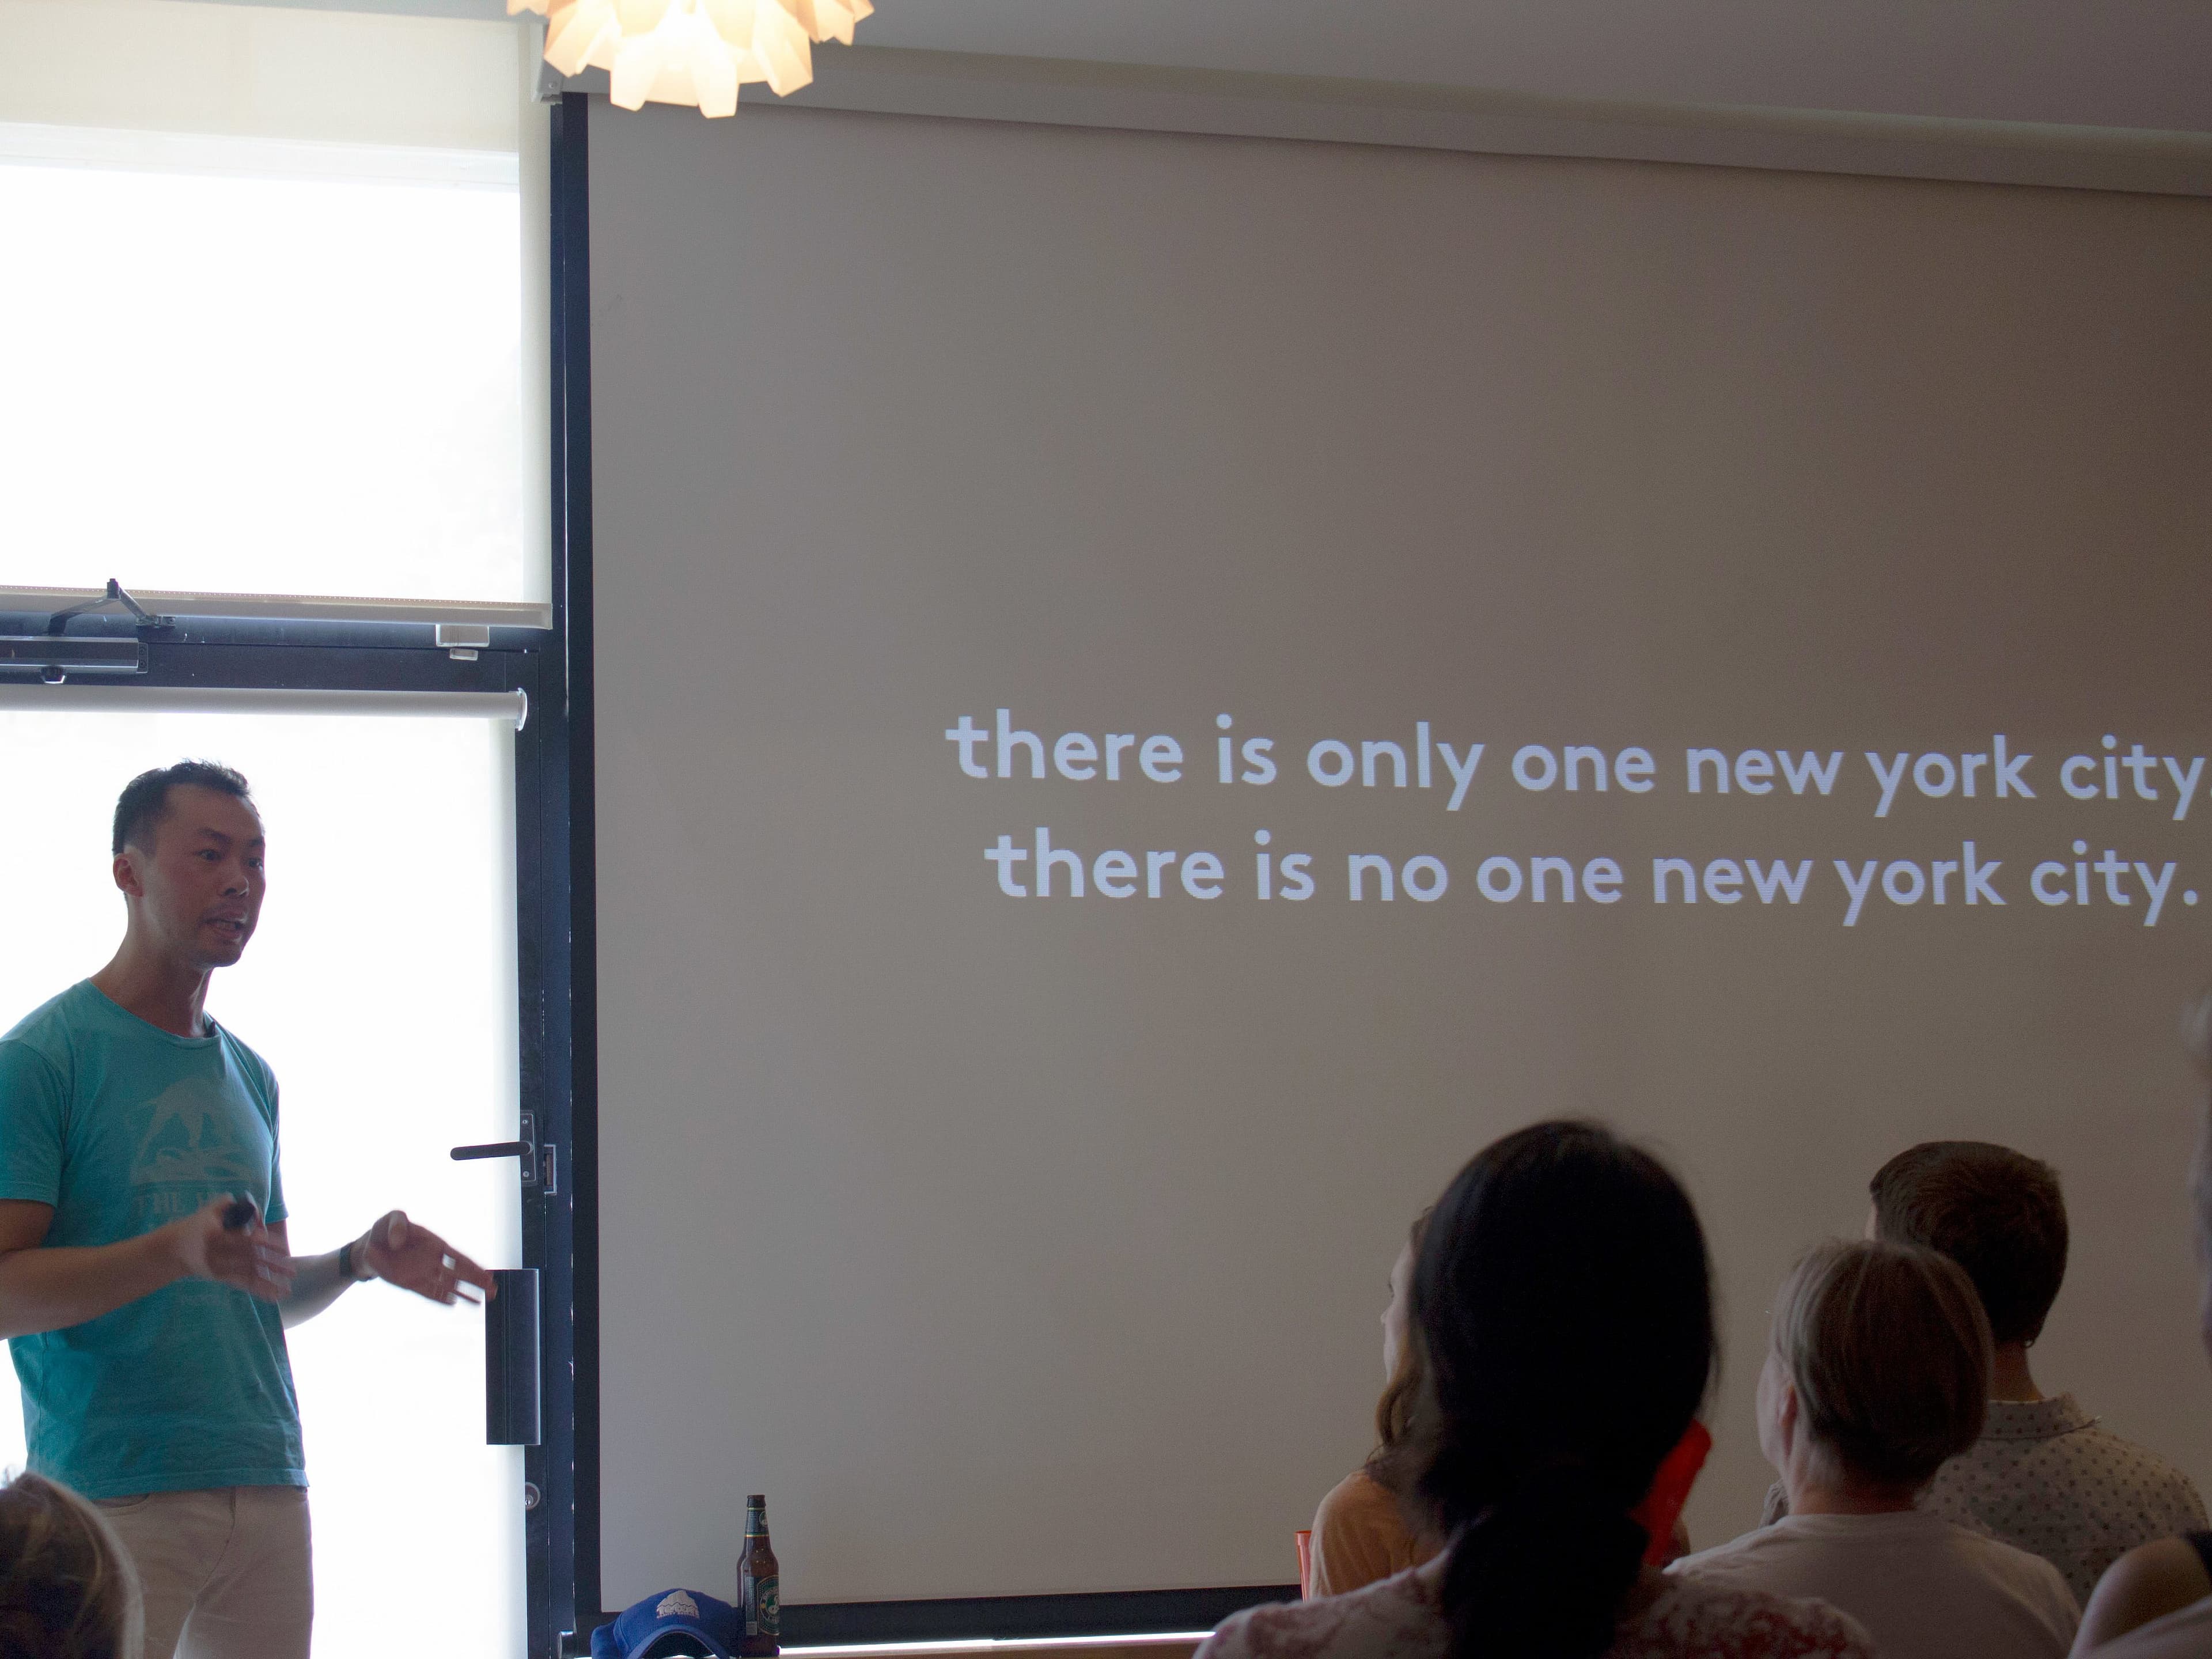 A man in a turquoise shirt is giving a presentation in front of an audience. Behind him, a projection screen displays the text: "there is only one new york city. there is no one new york city." The room is dimly lit, and a window is visible on the left.